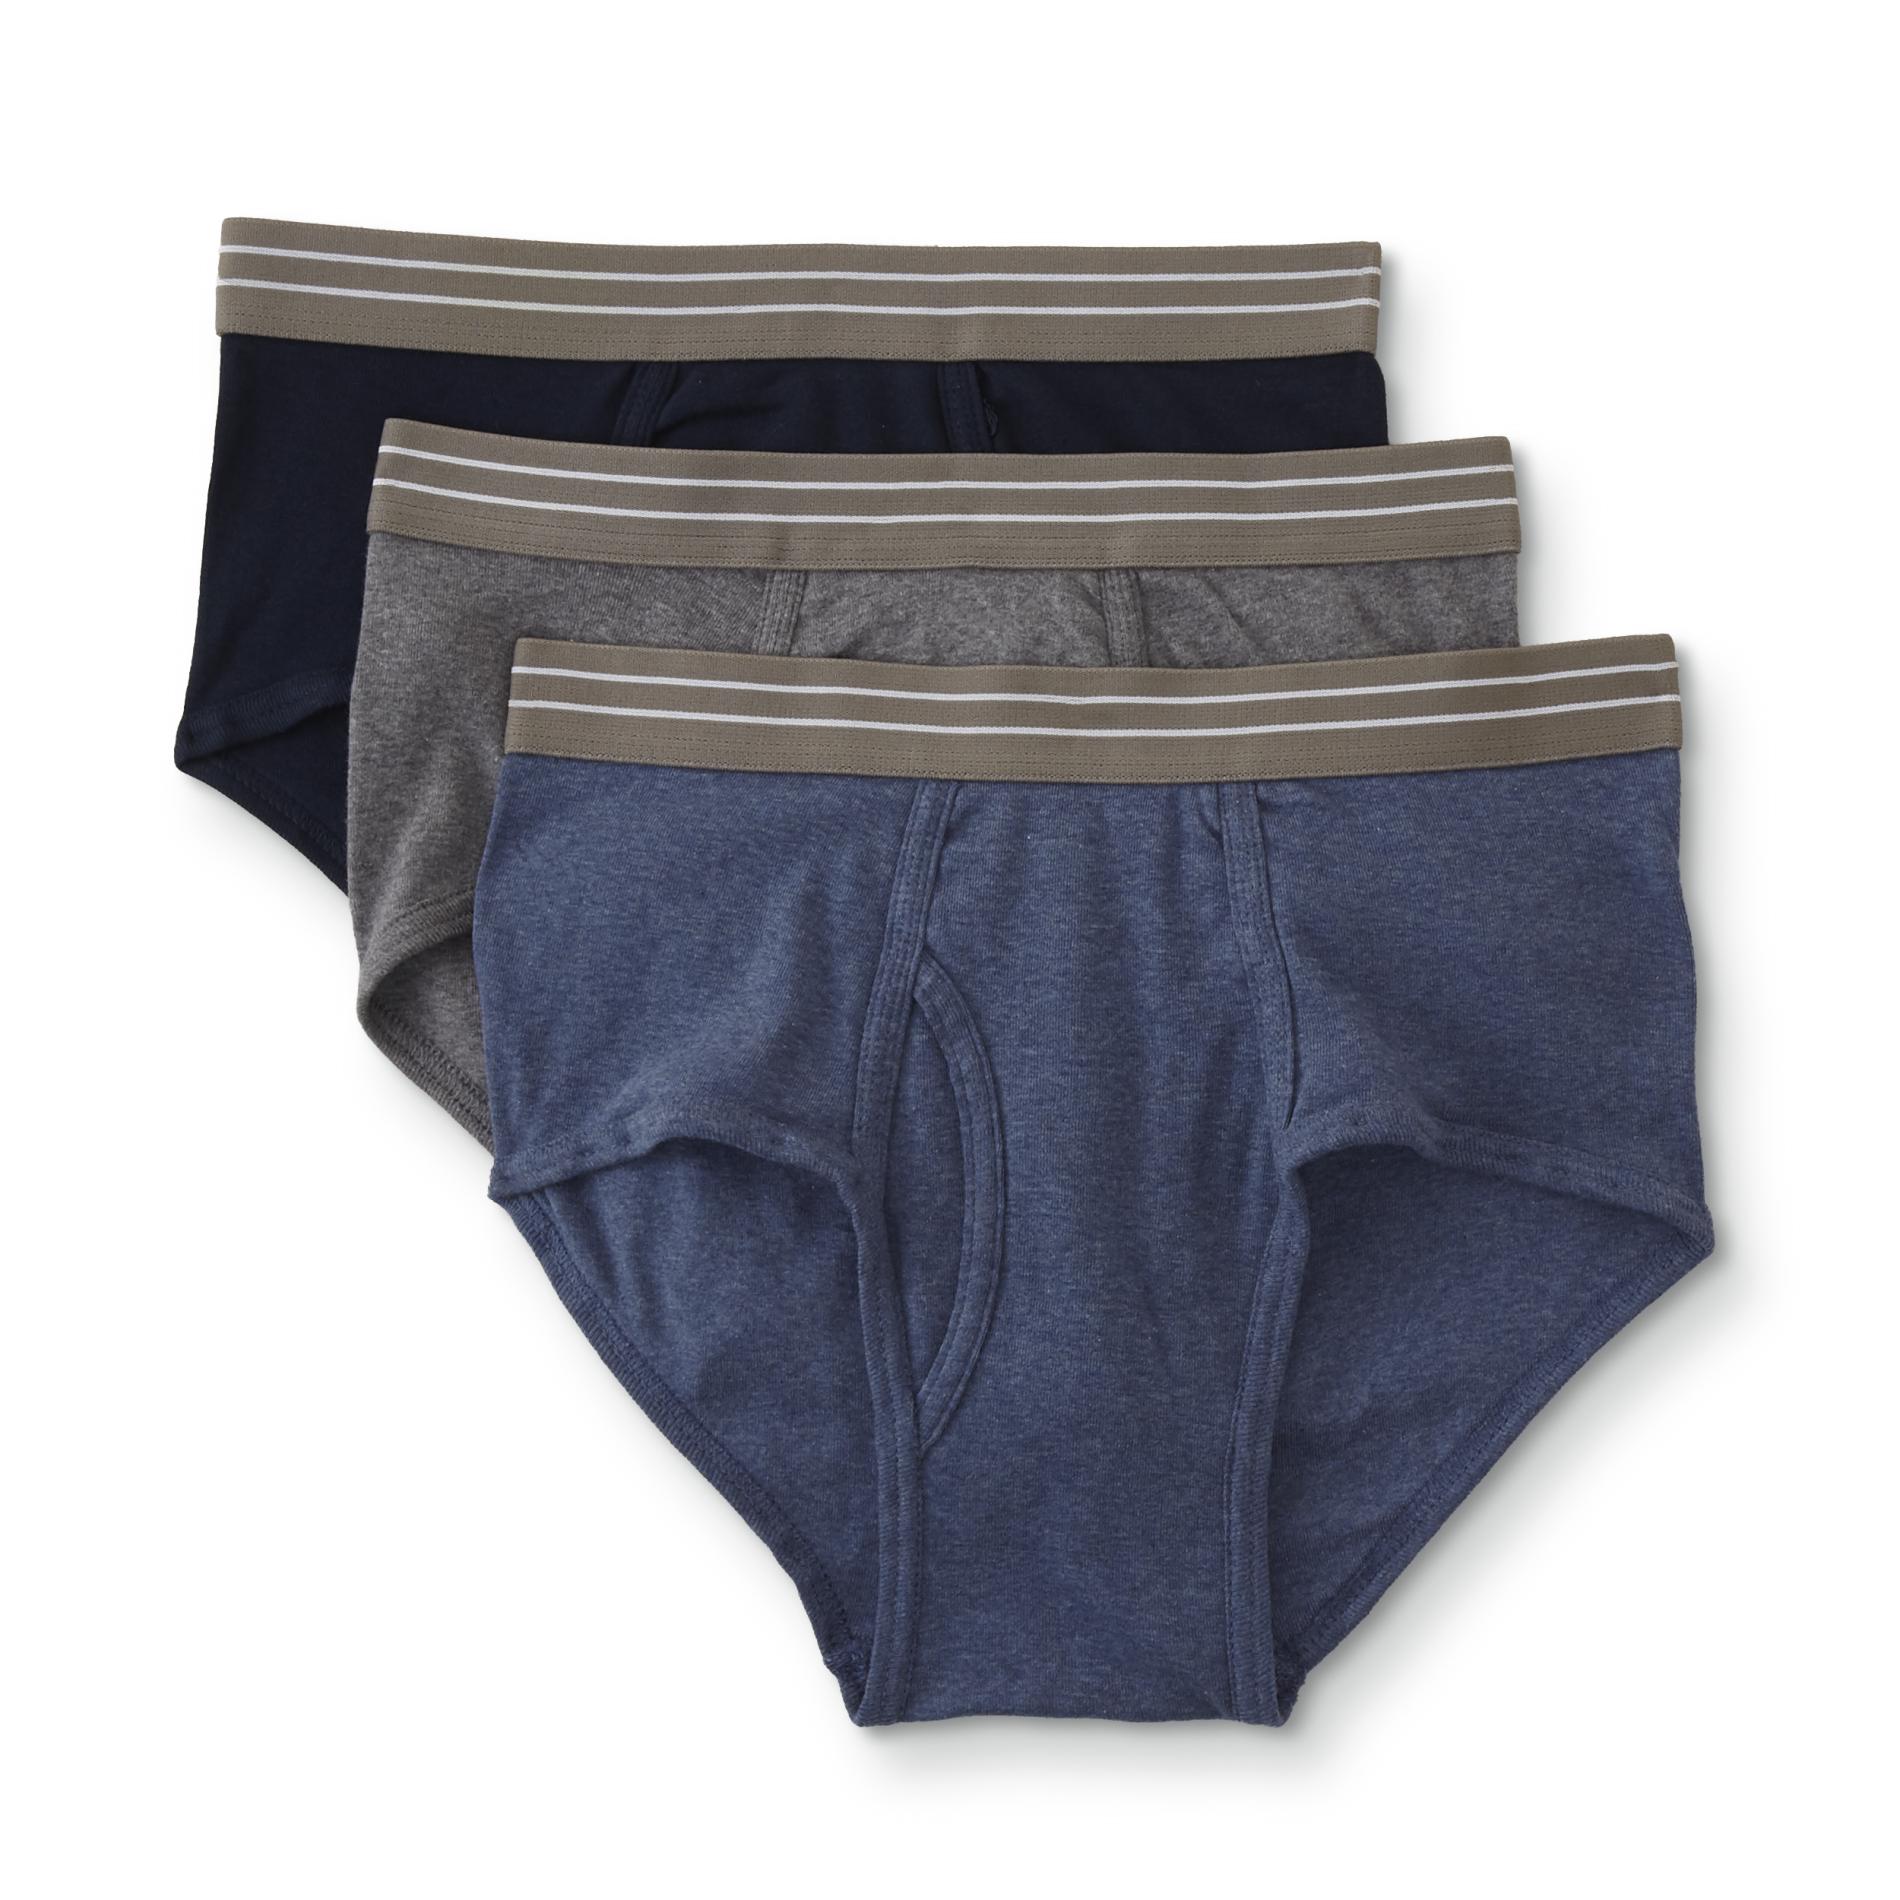 Simply Styled Men's Big & Tall 3-Pack Briefs